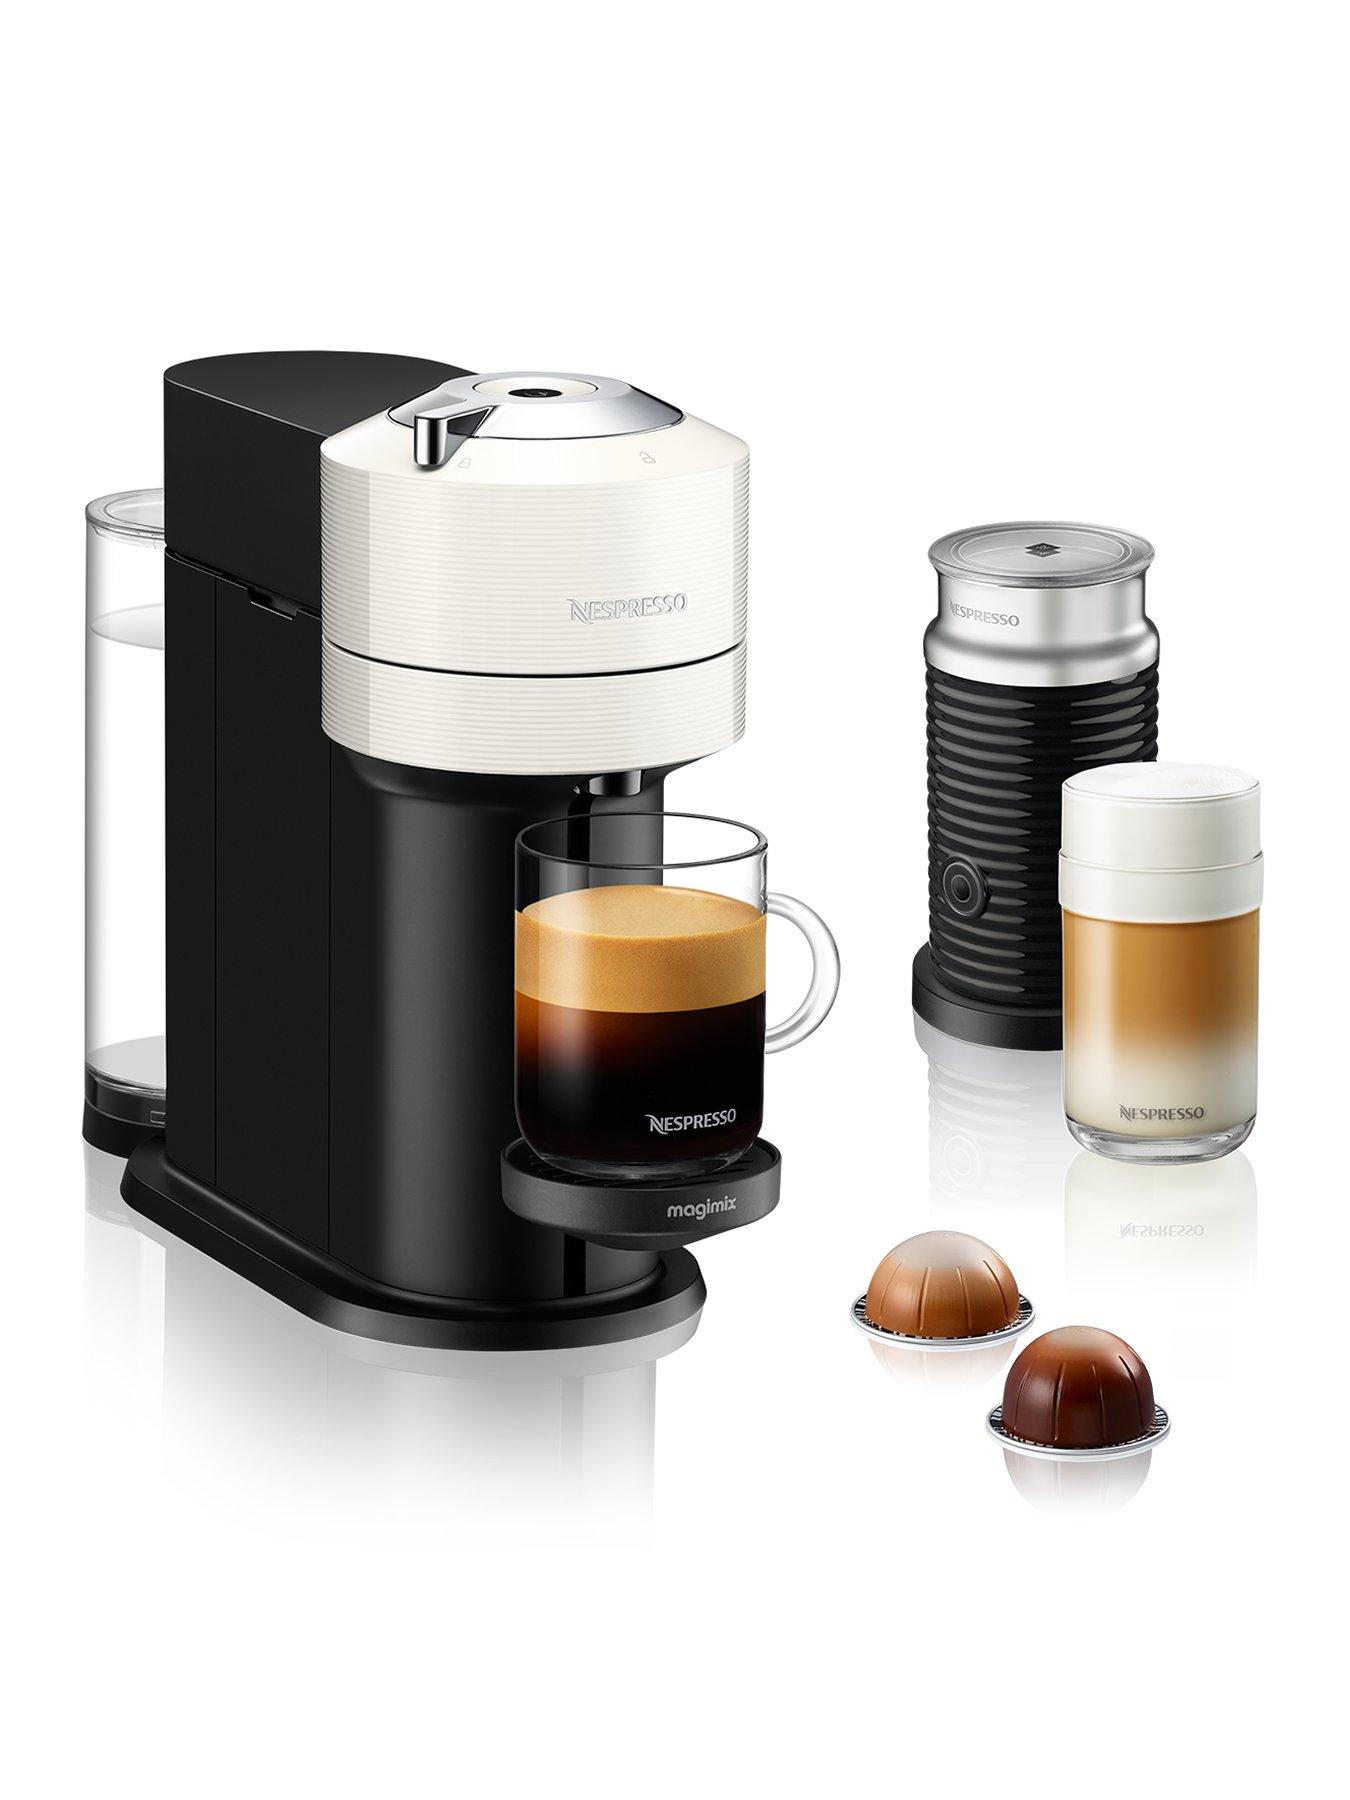 https://media.very.co.uk/i/very/QHWFQ_SQ1_0000000088_NO_COLOR_SLf/nespresso-vertuo-next-11710-coffee-machine-with-milk-frother-by-magimix-white.jpg?$180x240_retinamobilex2$&$roundel_very$&p1_img=free_coffee_30capsules&p3_img=video_roundel